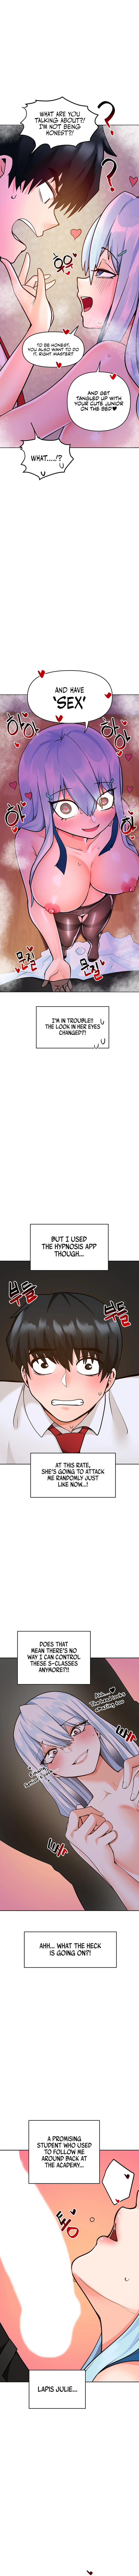 The Hypnosis App was Fake image